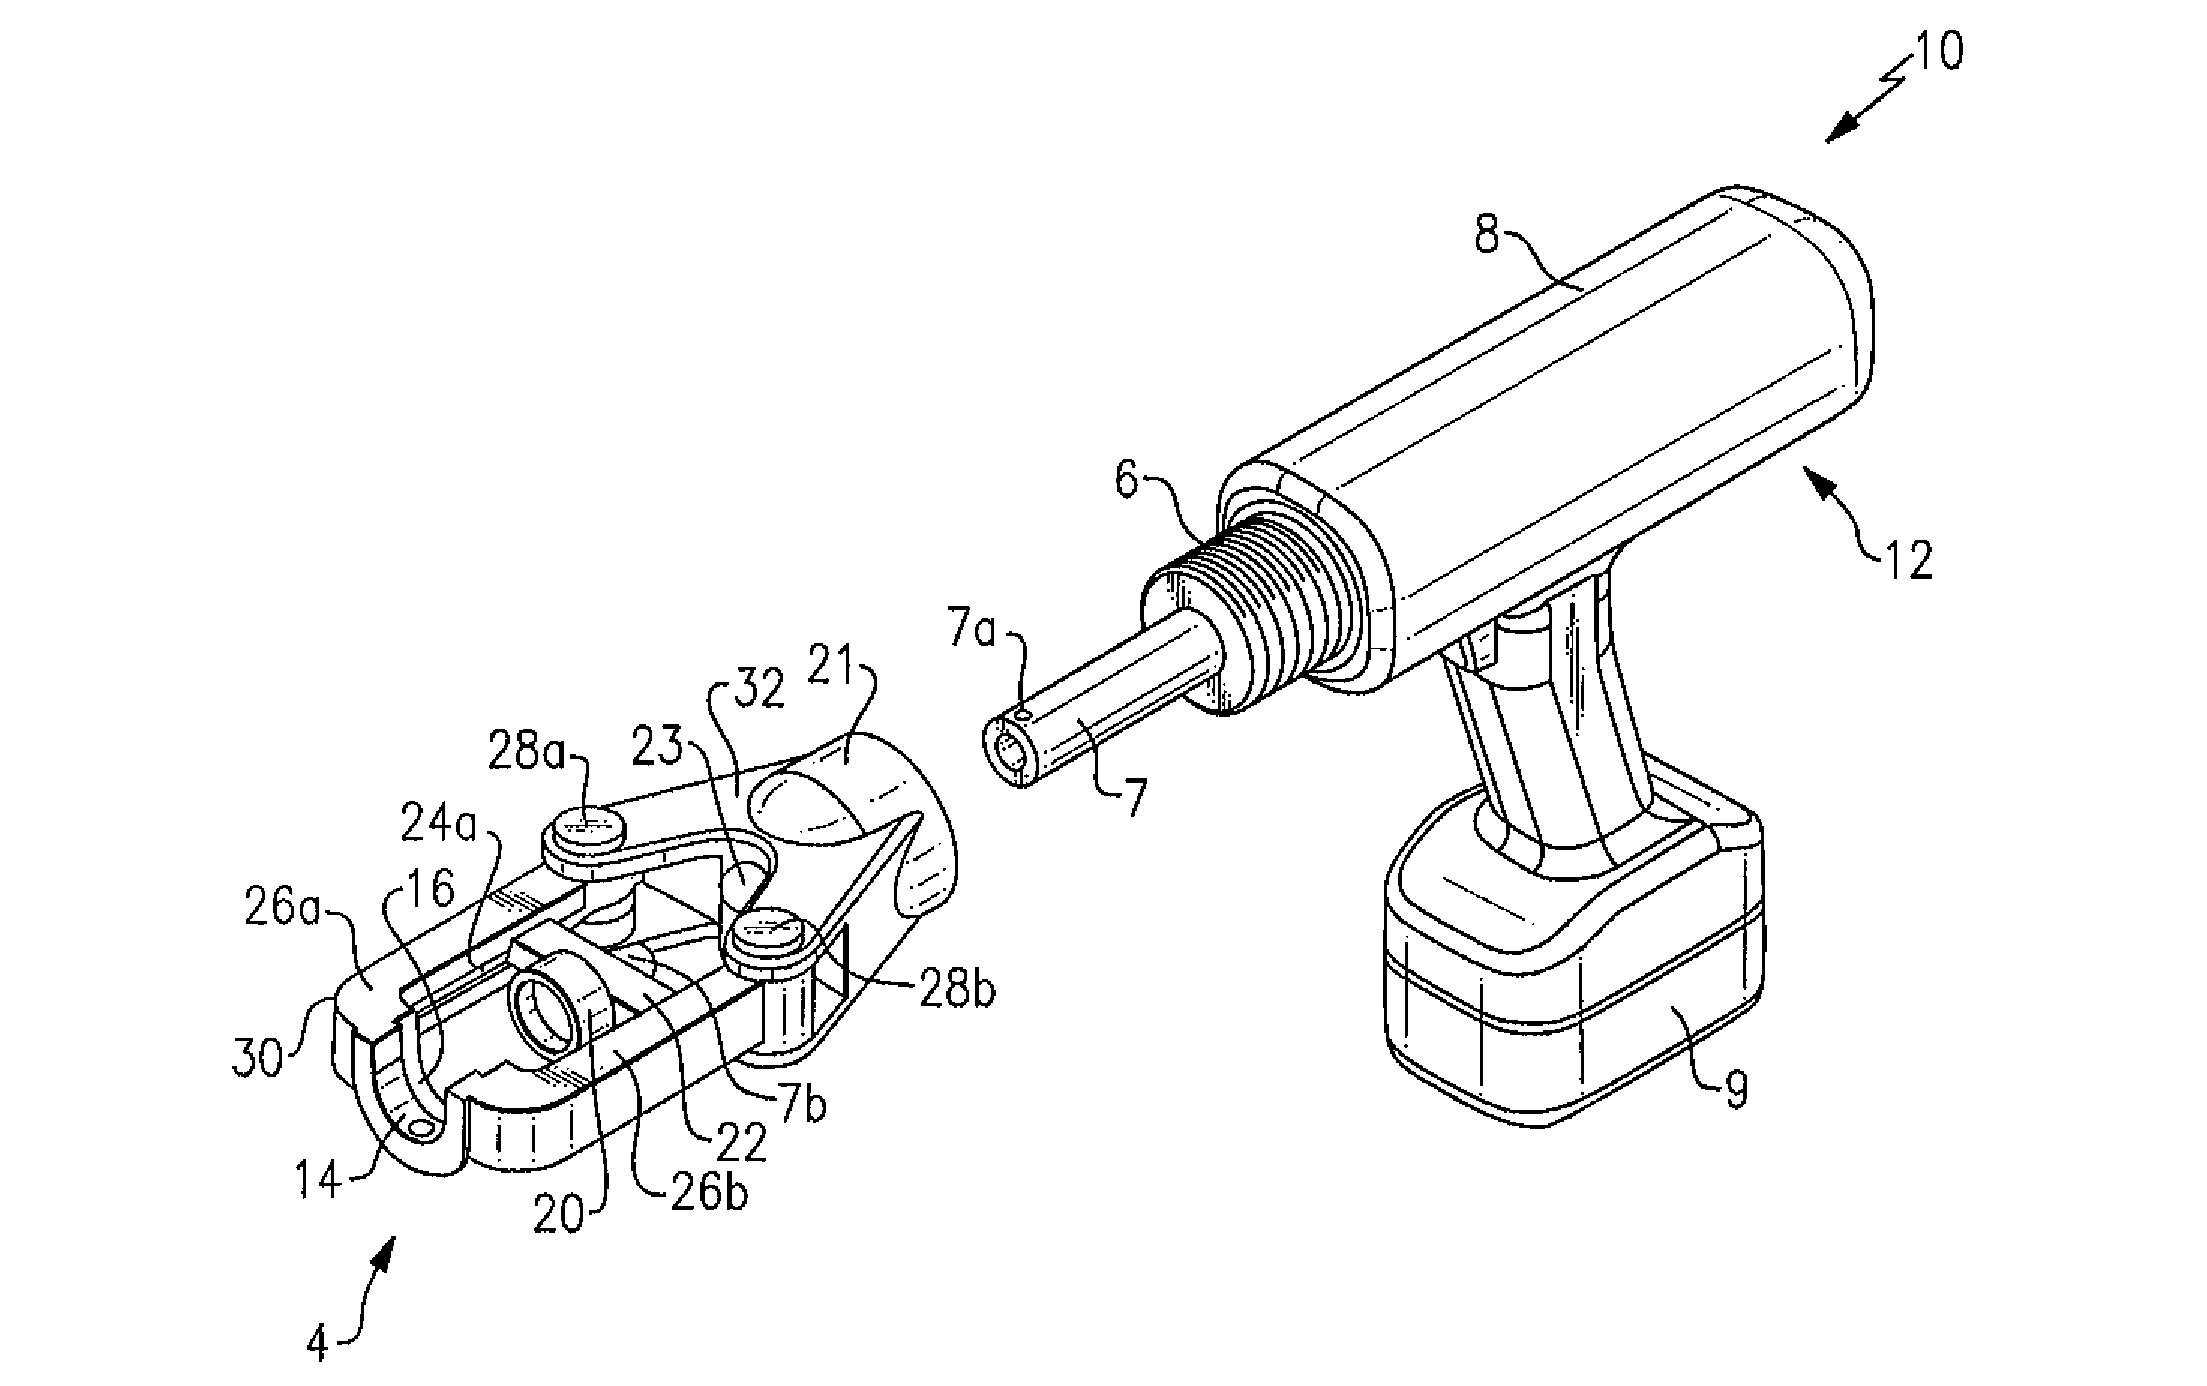 Hydraulic compression tool for installing a coaxial cable connector